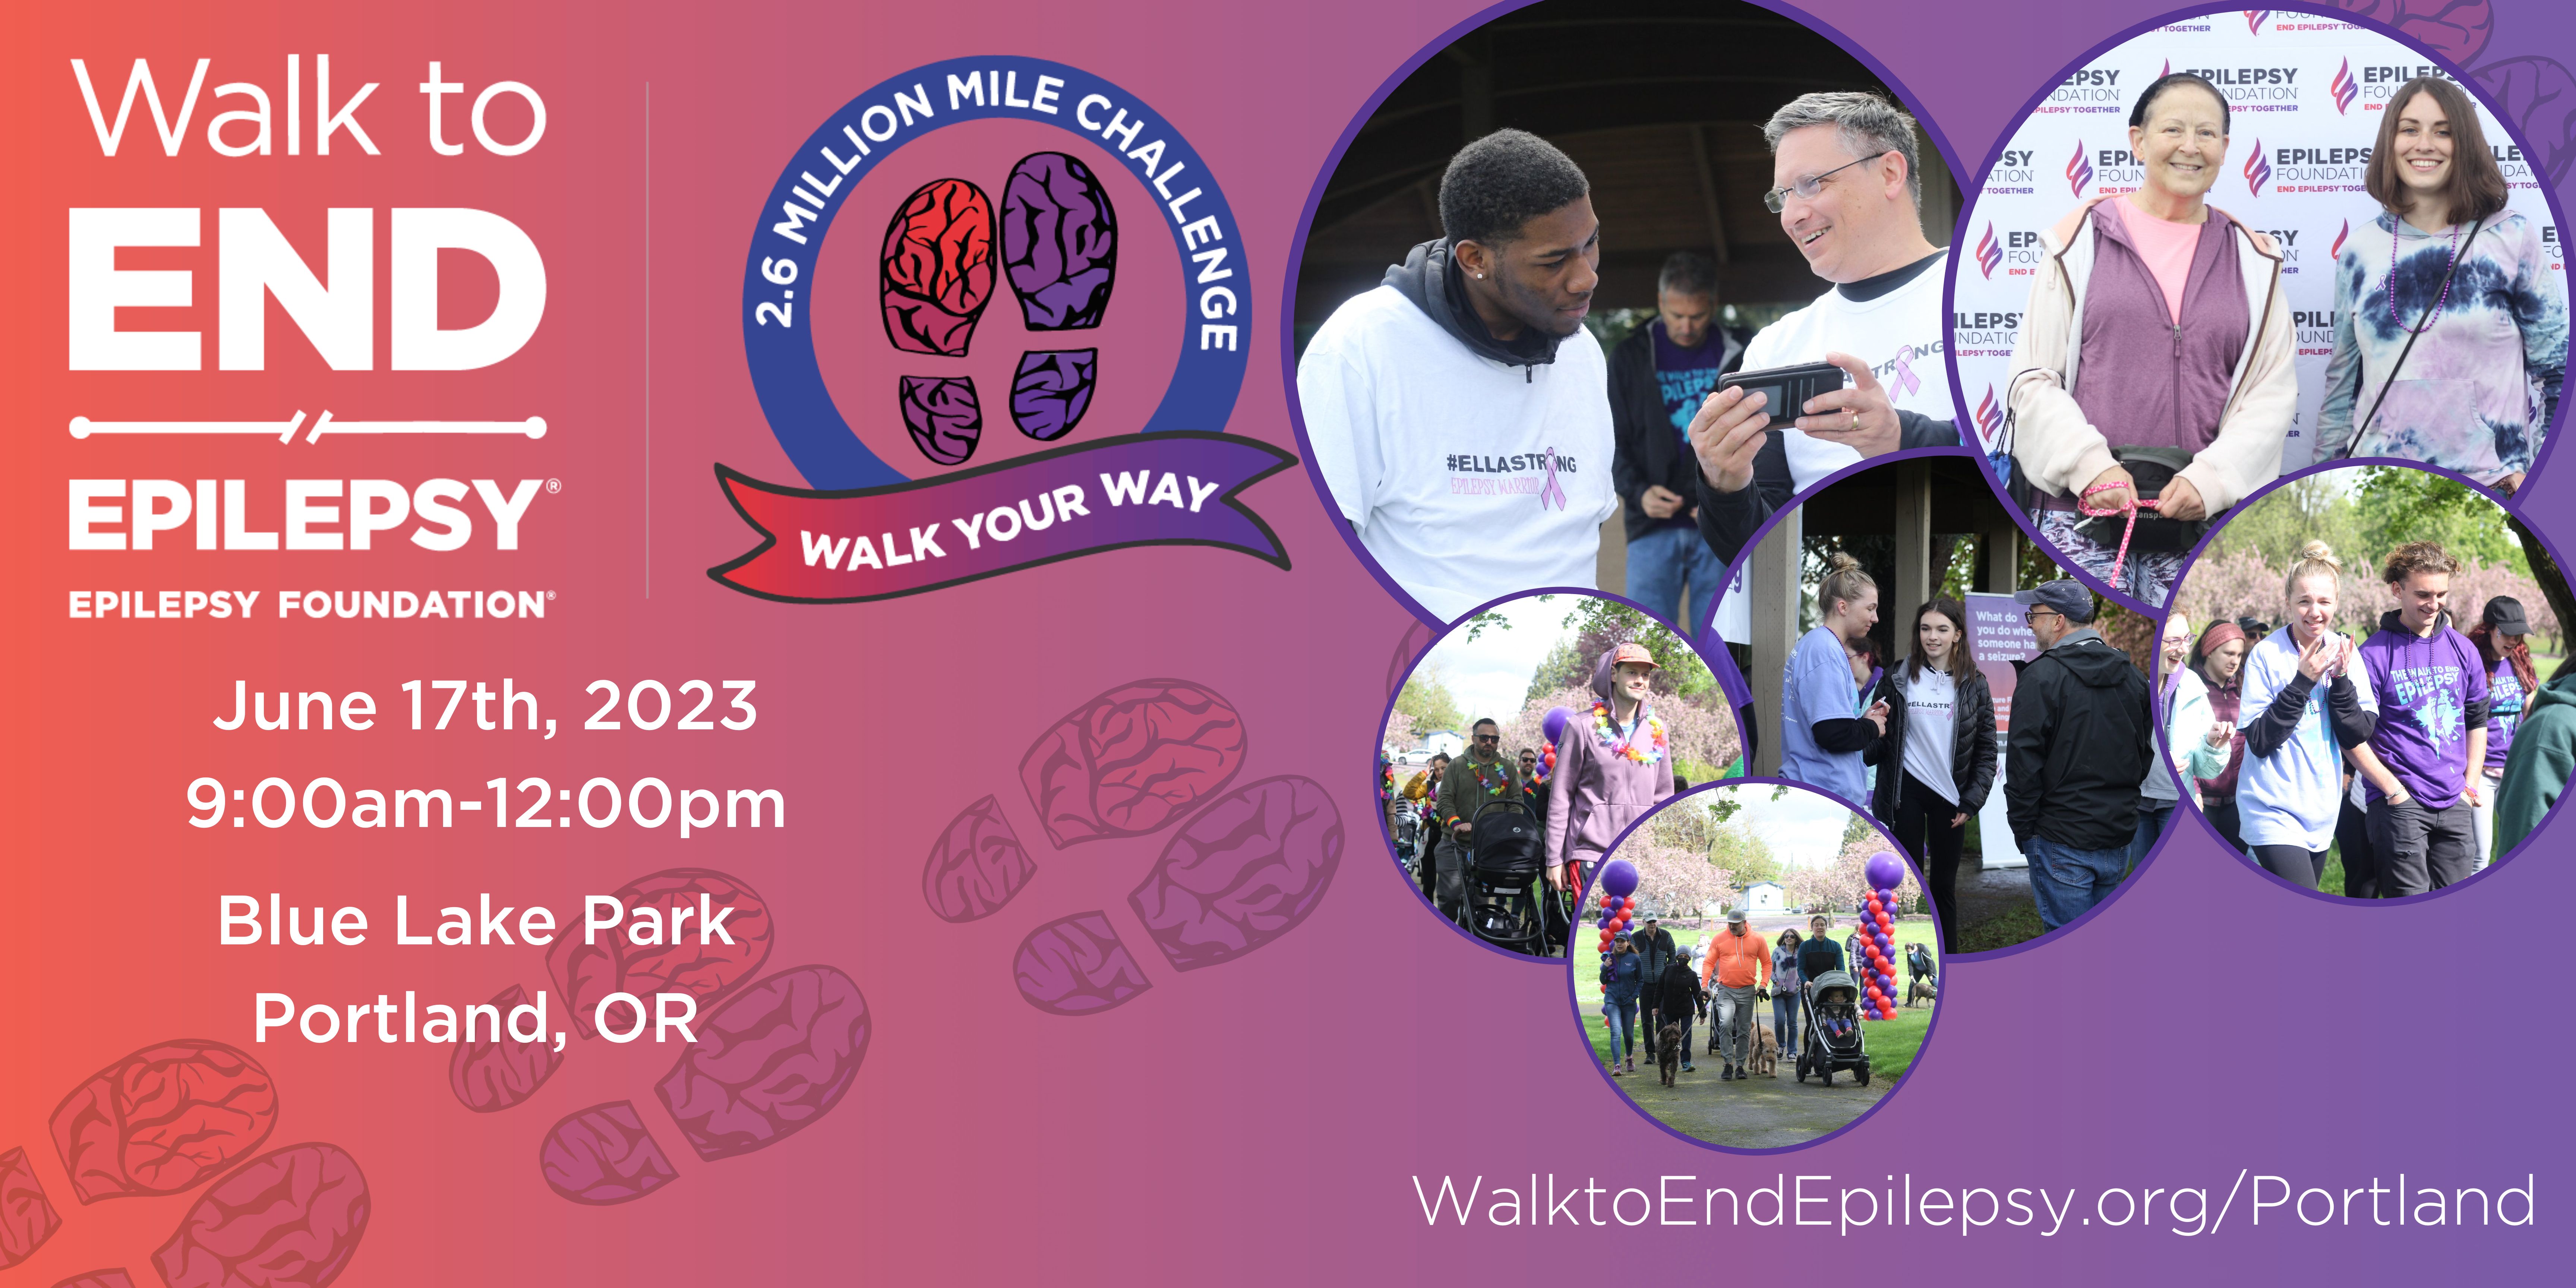 Walk to end epilepsy graphic, images of Portland Walk and link